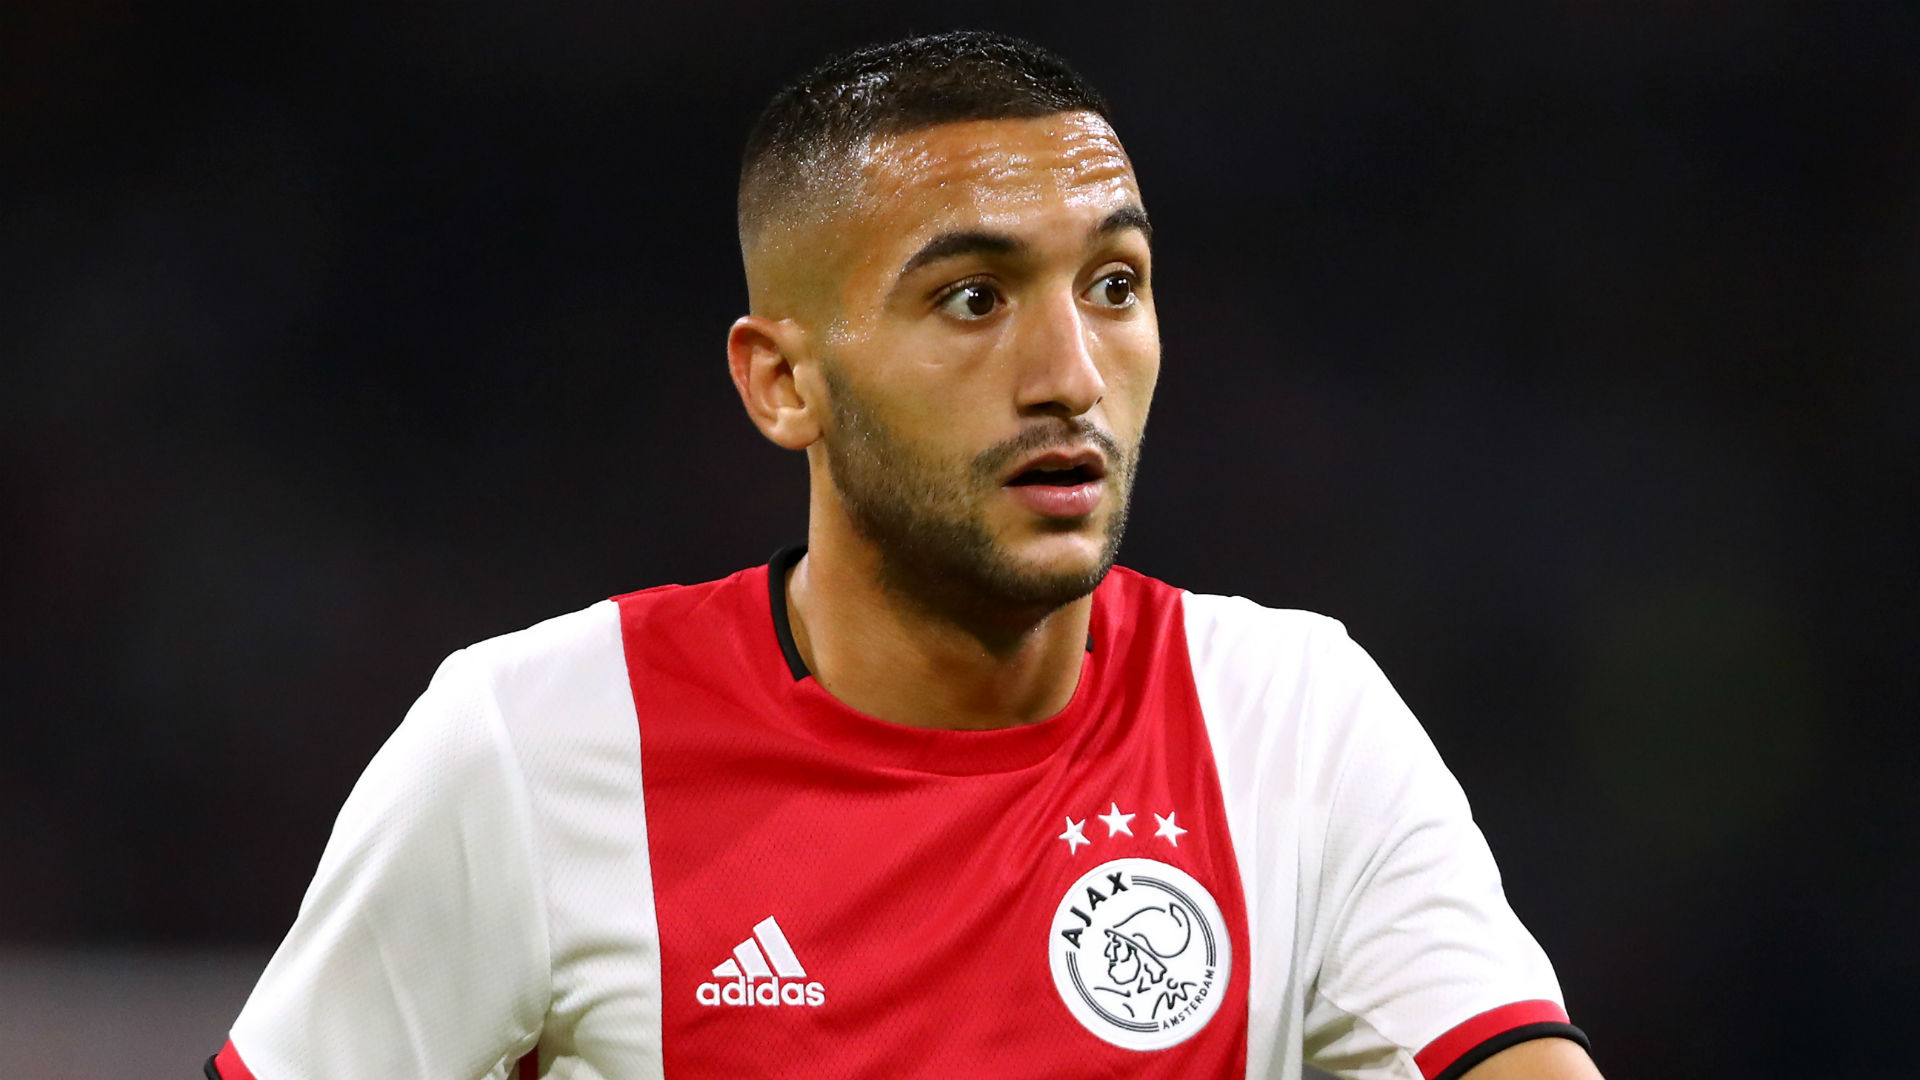 Hakim Ziyech is aware his naysayers think he is too lightweight for the Premier League, but the Chelsea newcomer feels he can thrive.